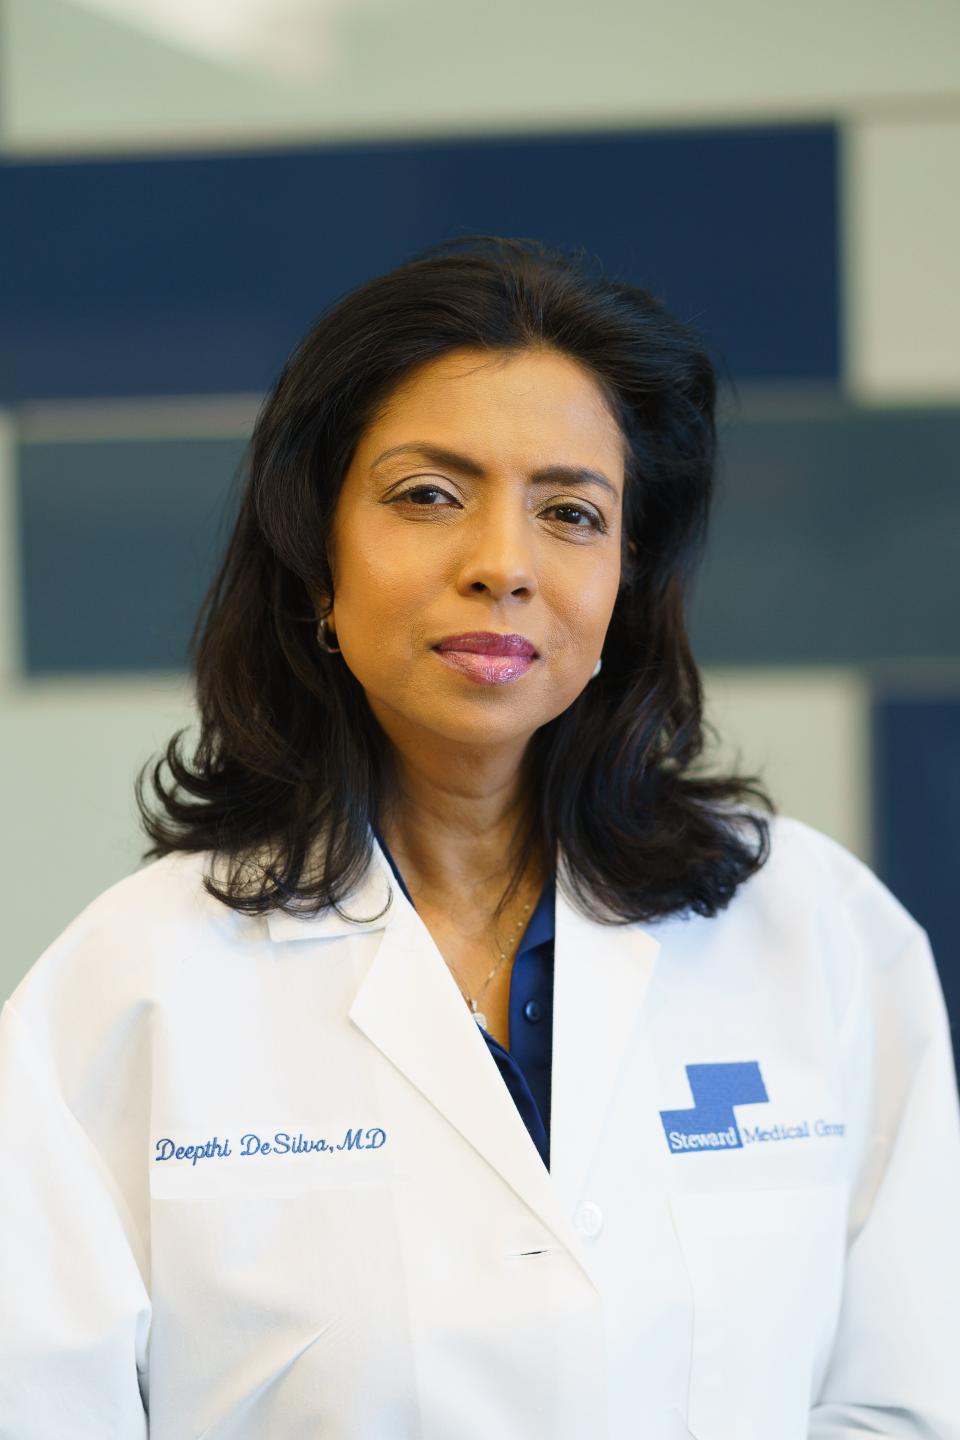 Dr. Deepthi de Silva has joined the Steward Center for Weight Control at Morton Hospital.